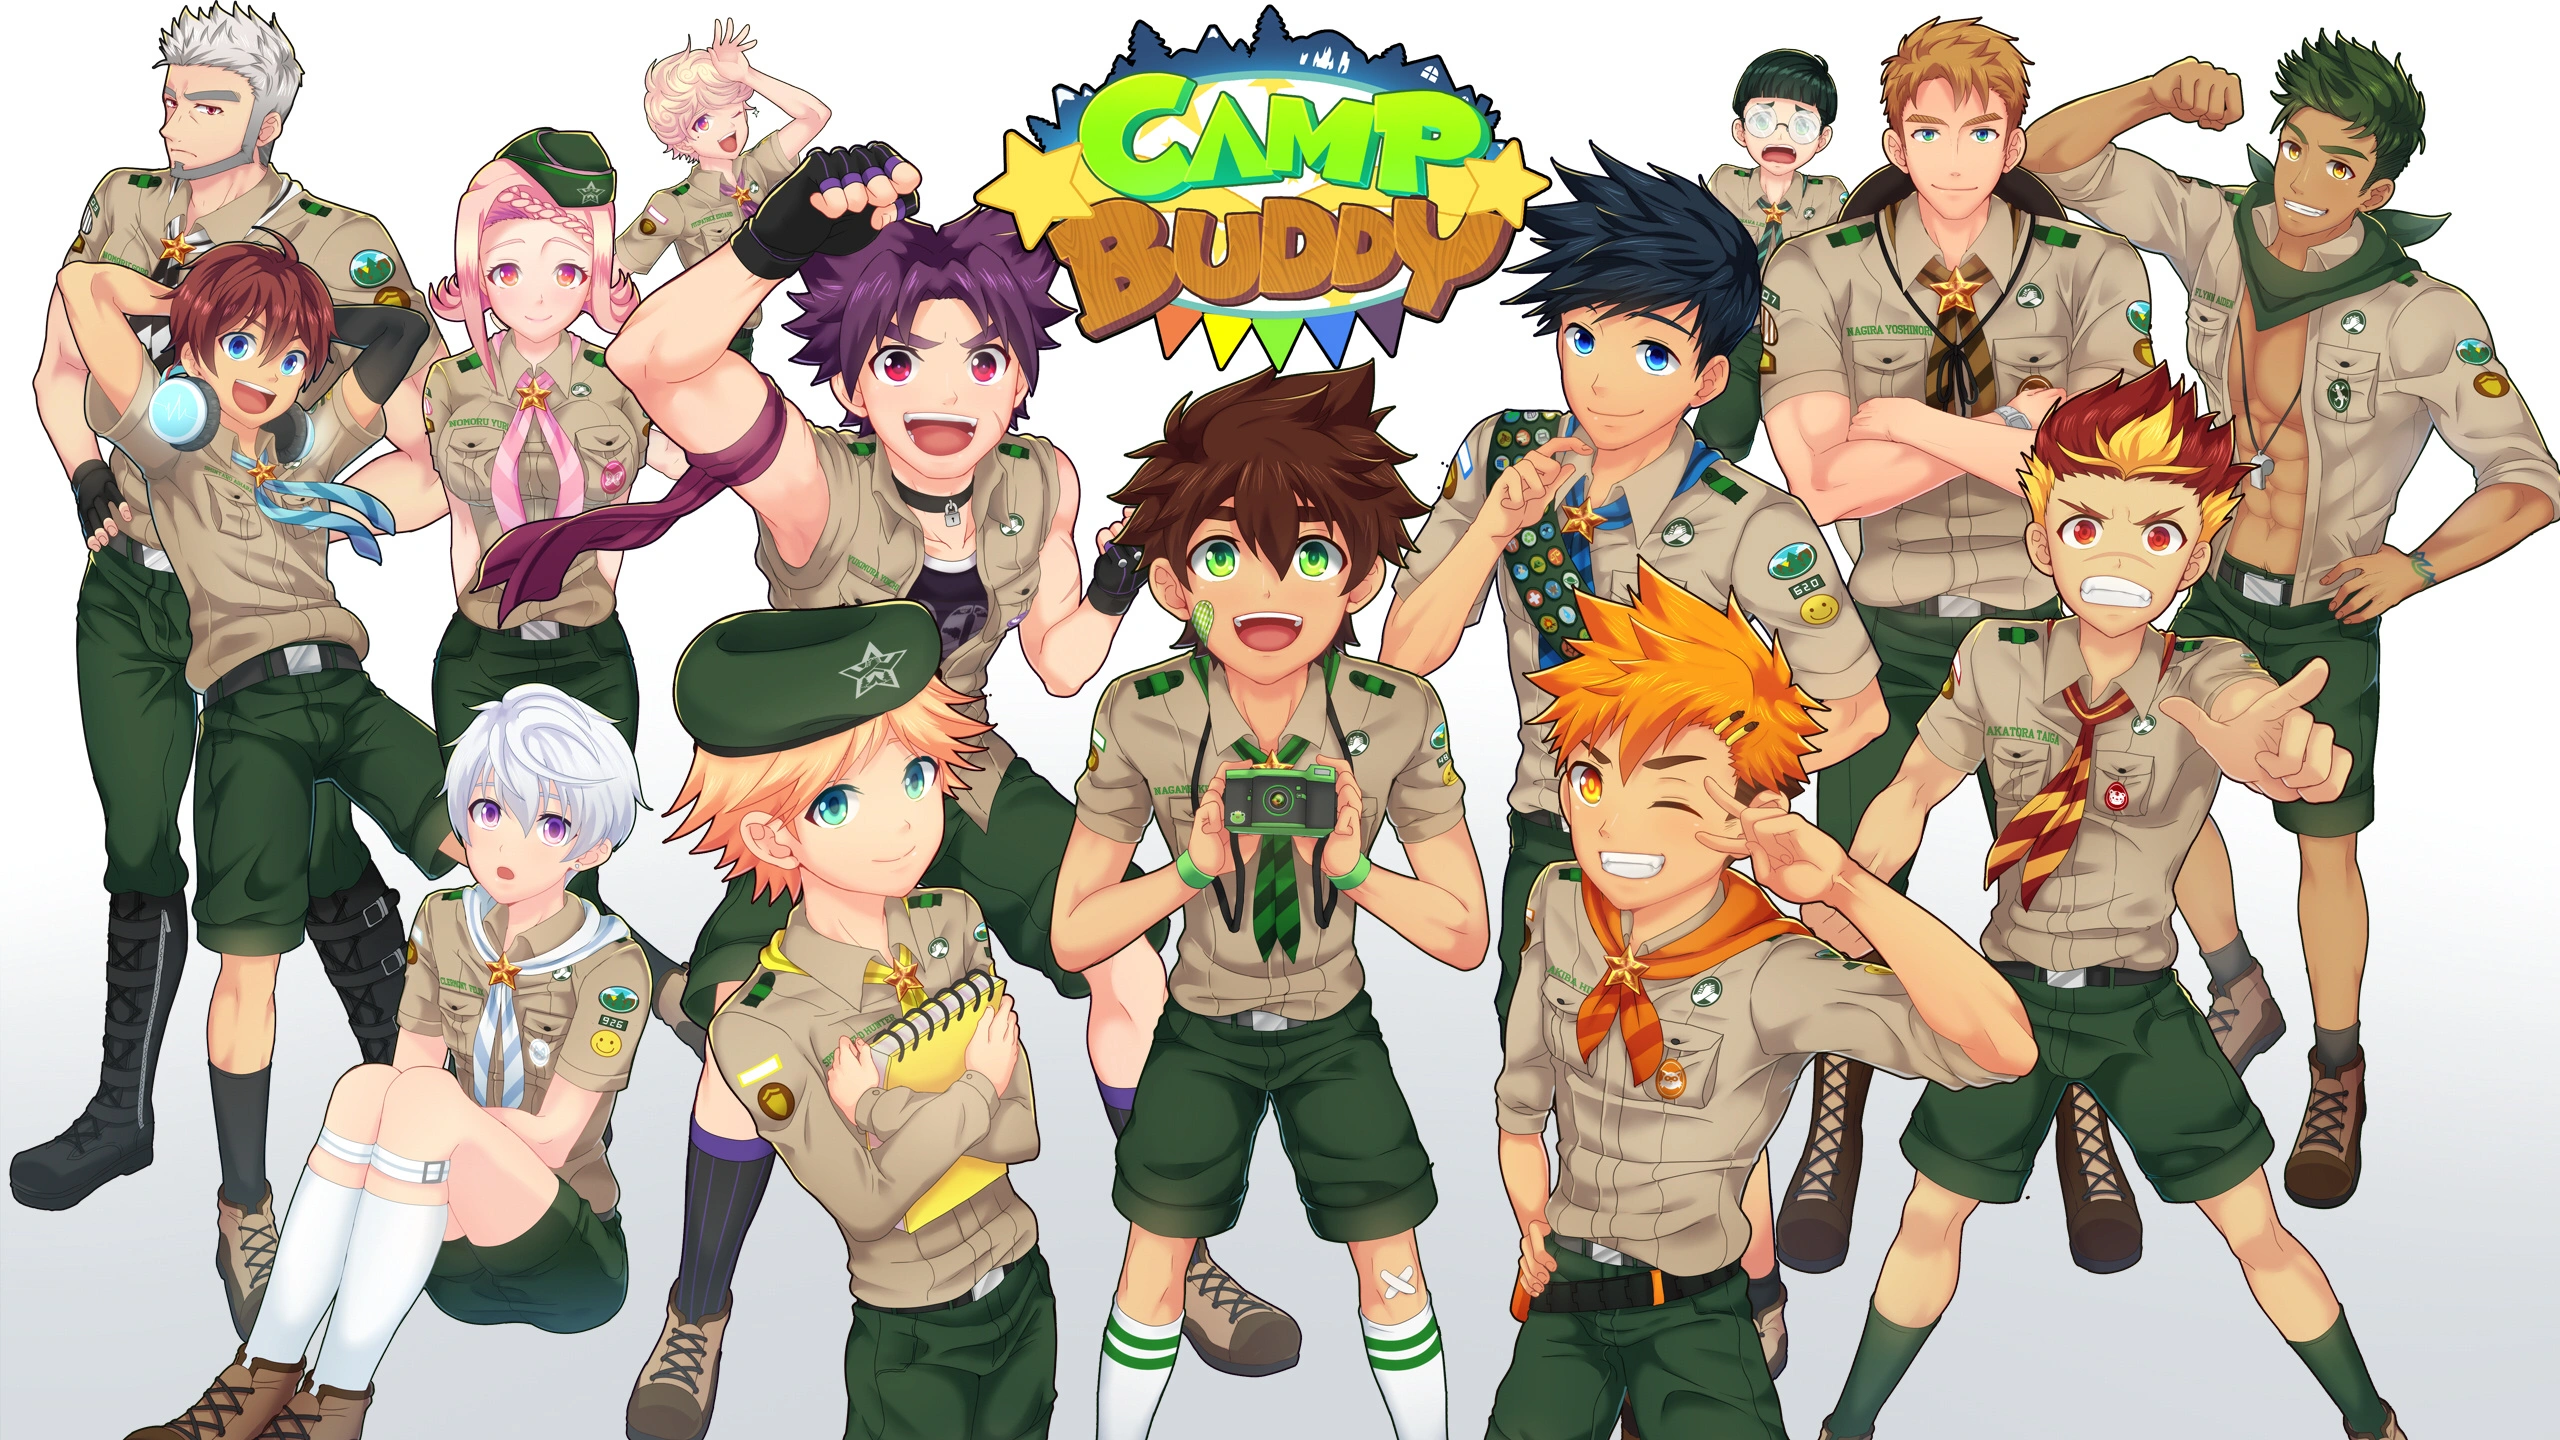 Camp Buddy Scoutmaster main image